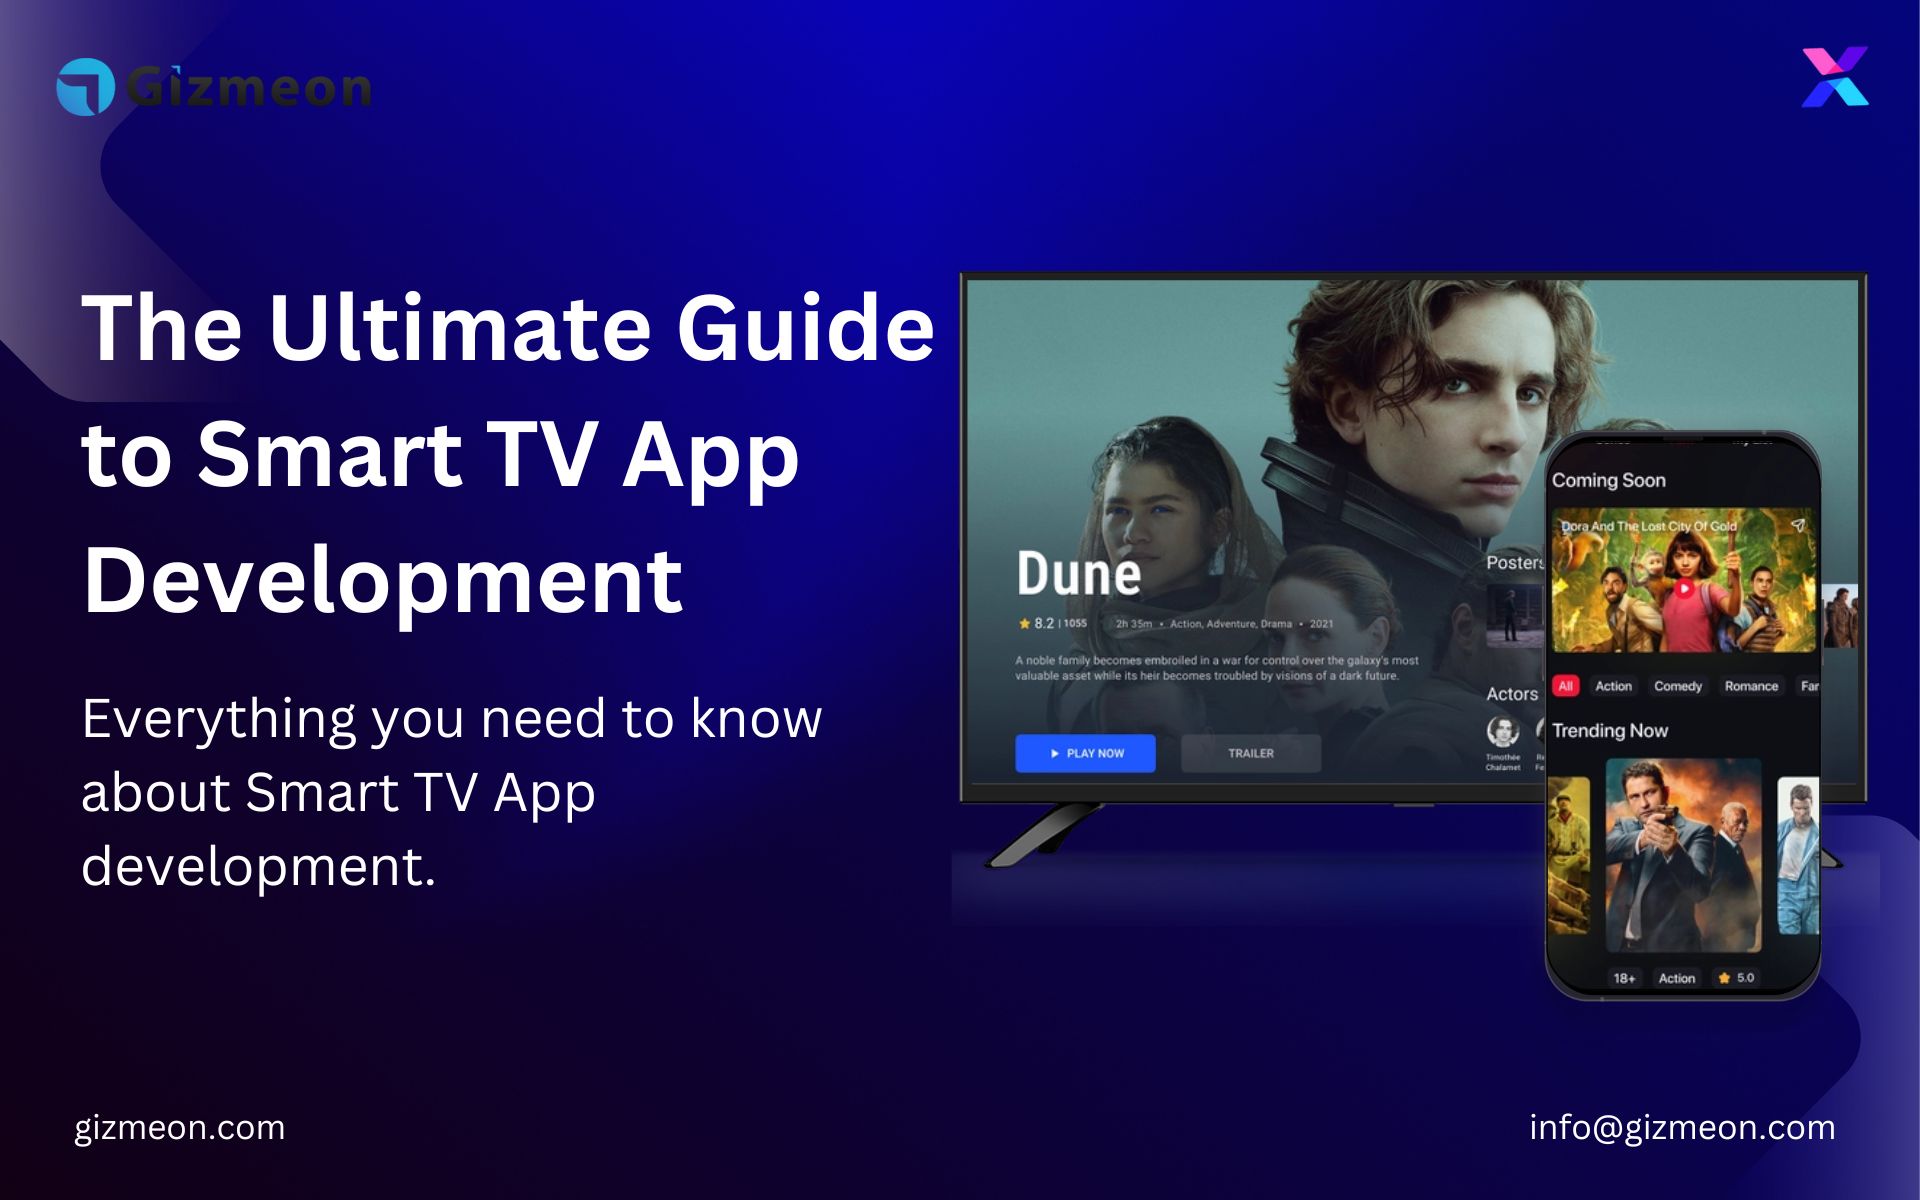 The Ultimate Guide to Smart TV App Development